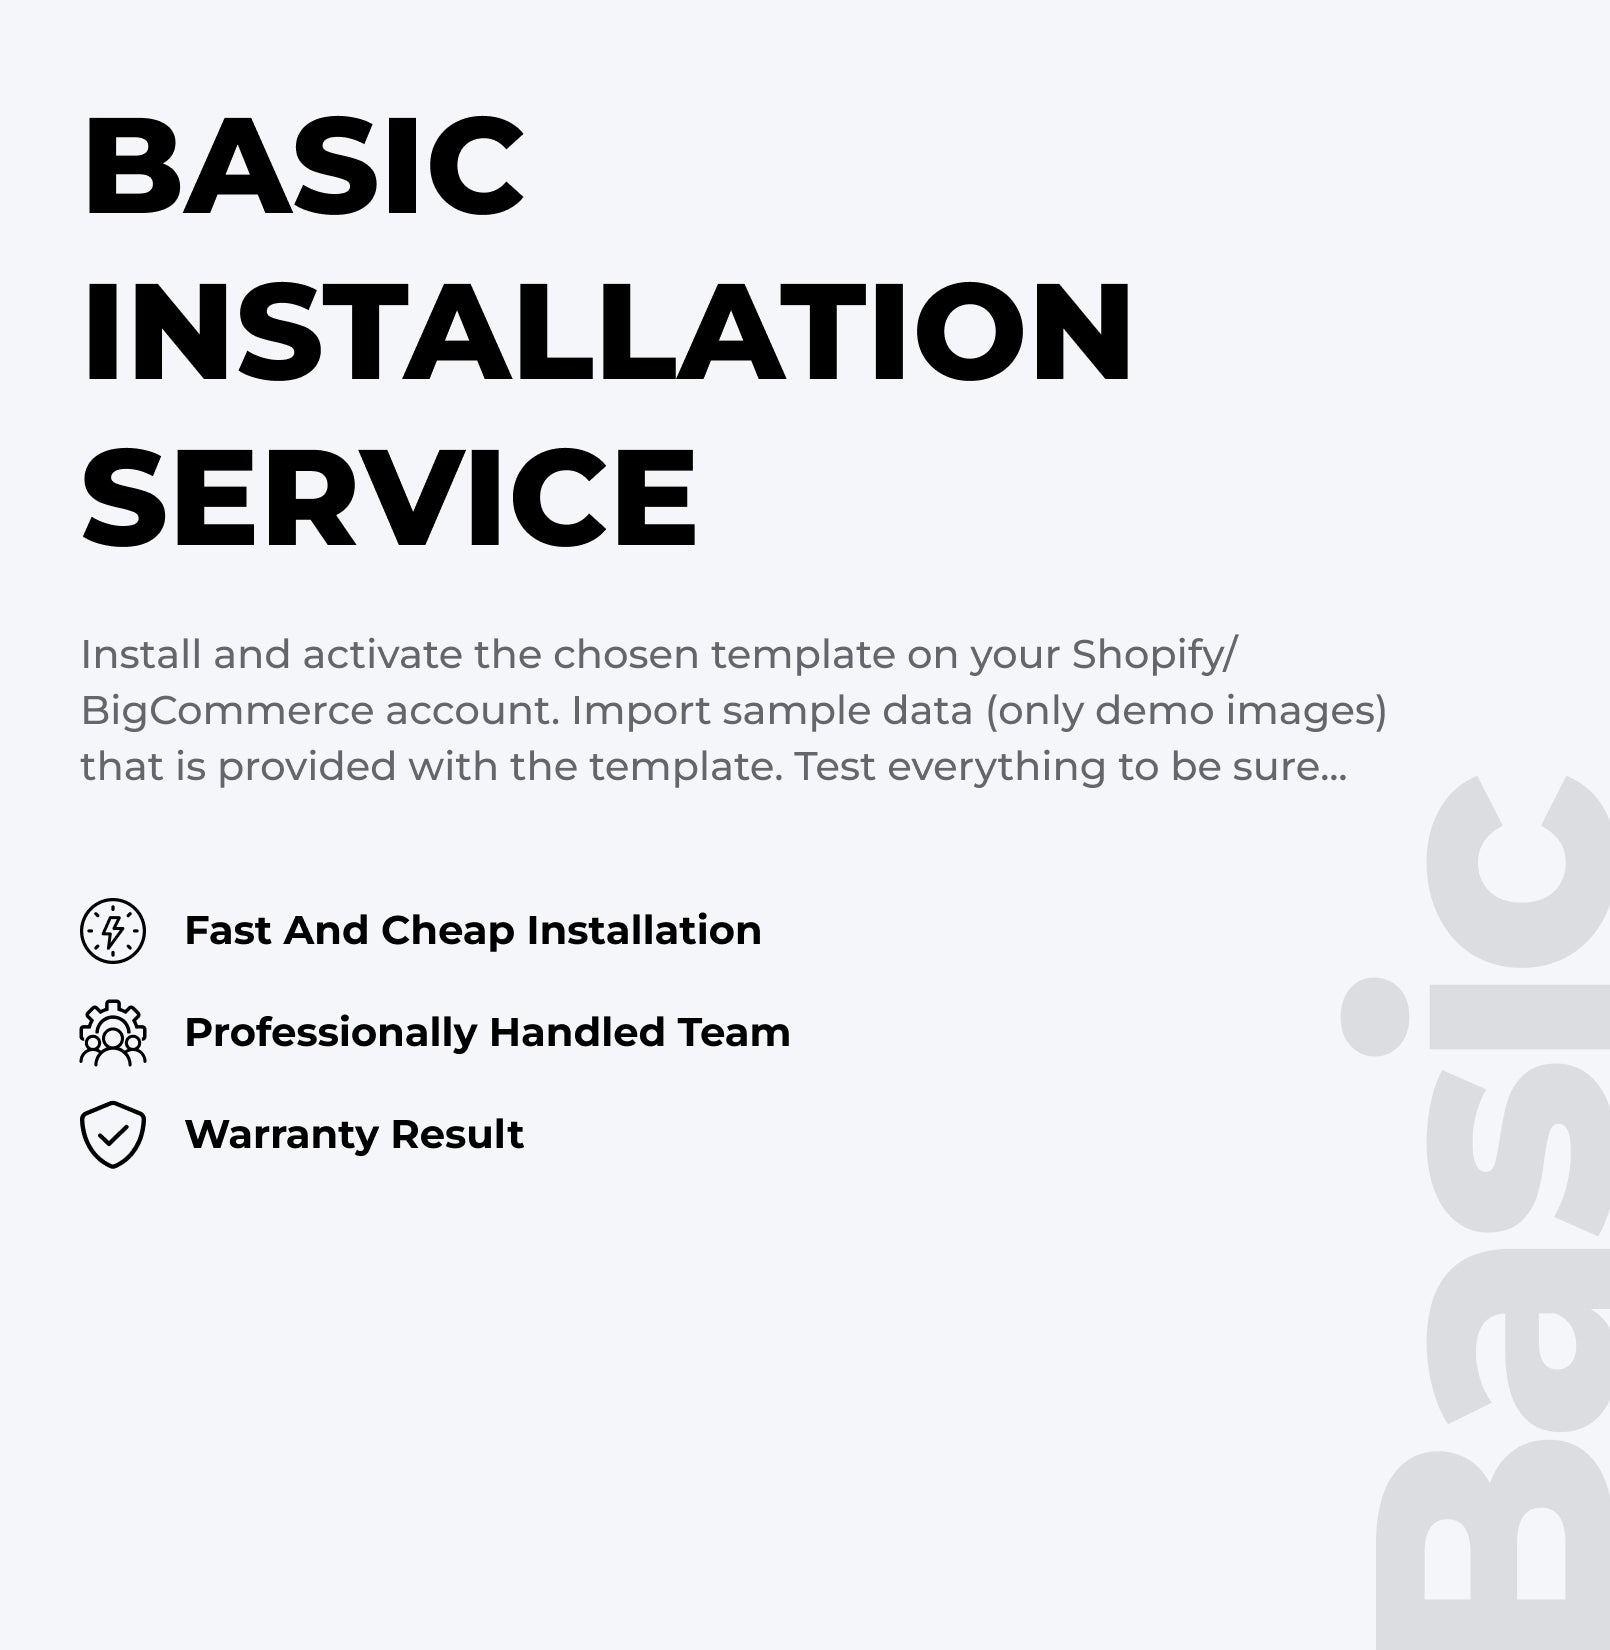 Basic Installation Service | Full Setup for Your Ecommerce Template - Shopify and BigCommerce